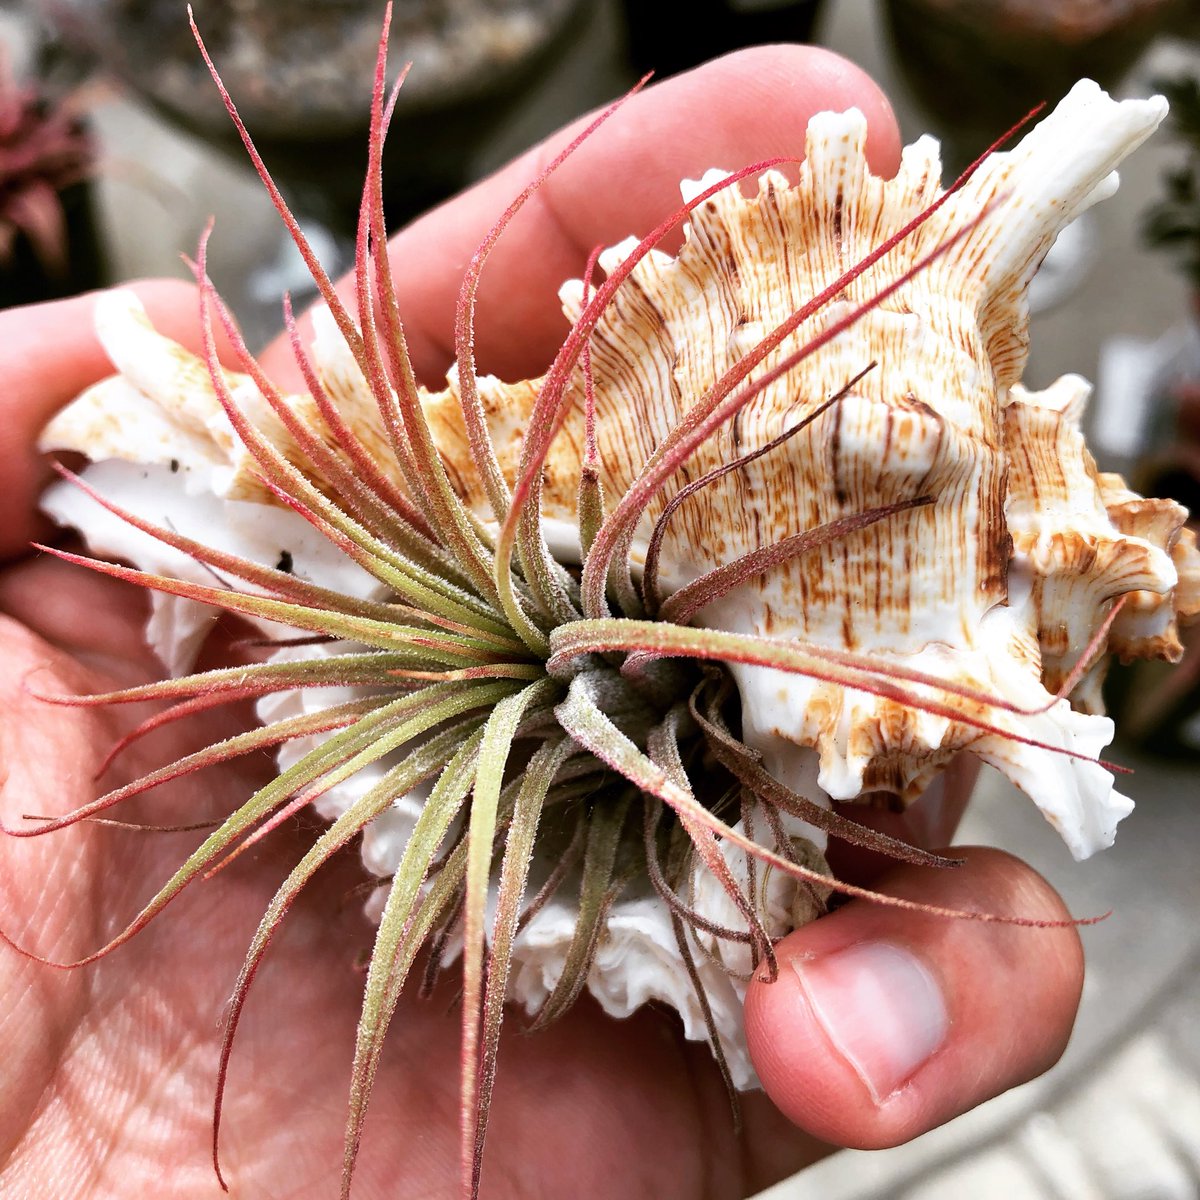 These little #nautilusshells are just so cute! We have a variety of them with a variety of #airplants.

#nauticaltheme #oceantheme #airplantsofinstagram #colorfulplants #suburbanlg #shoplocalkc